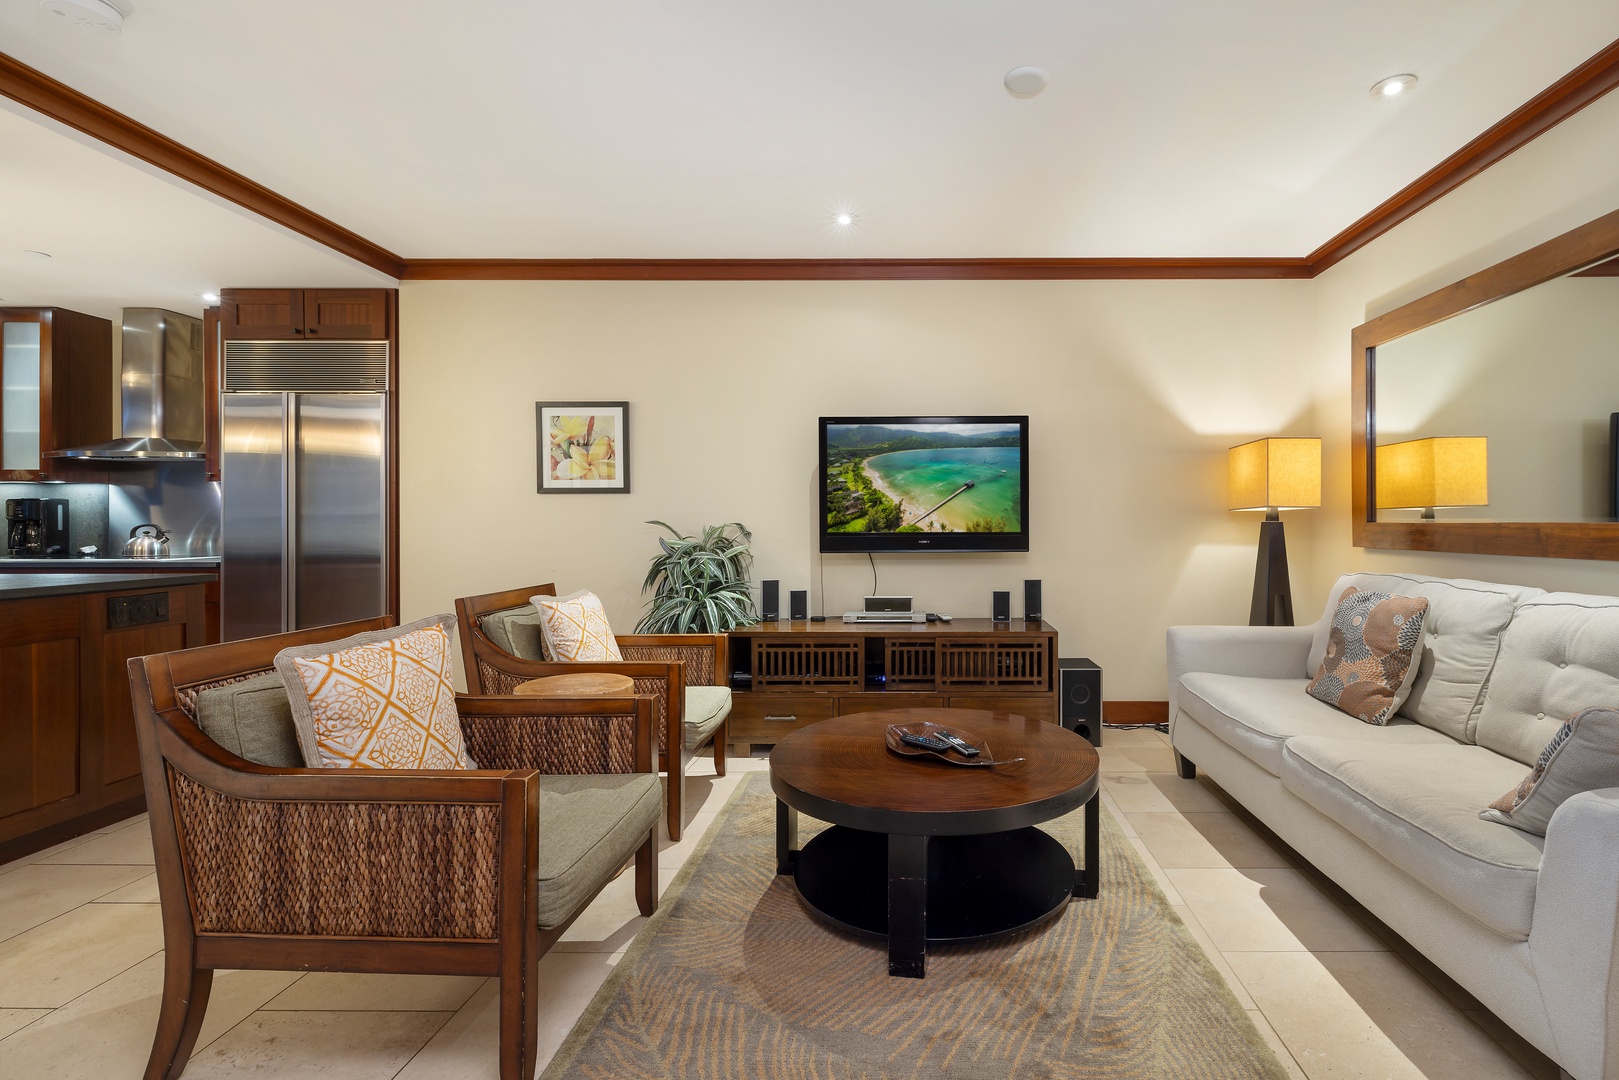 Kapolei Vacation Rentals, Ko Olina Beach Villas O1006 - The living room area with comfortable seating and TV.